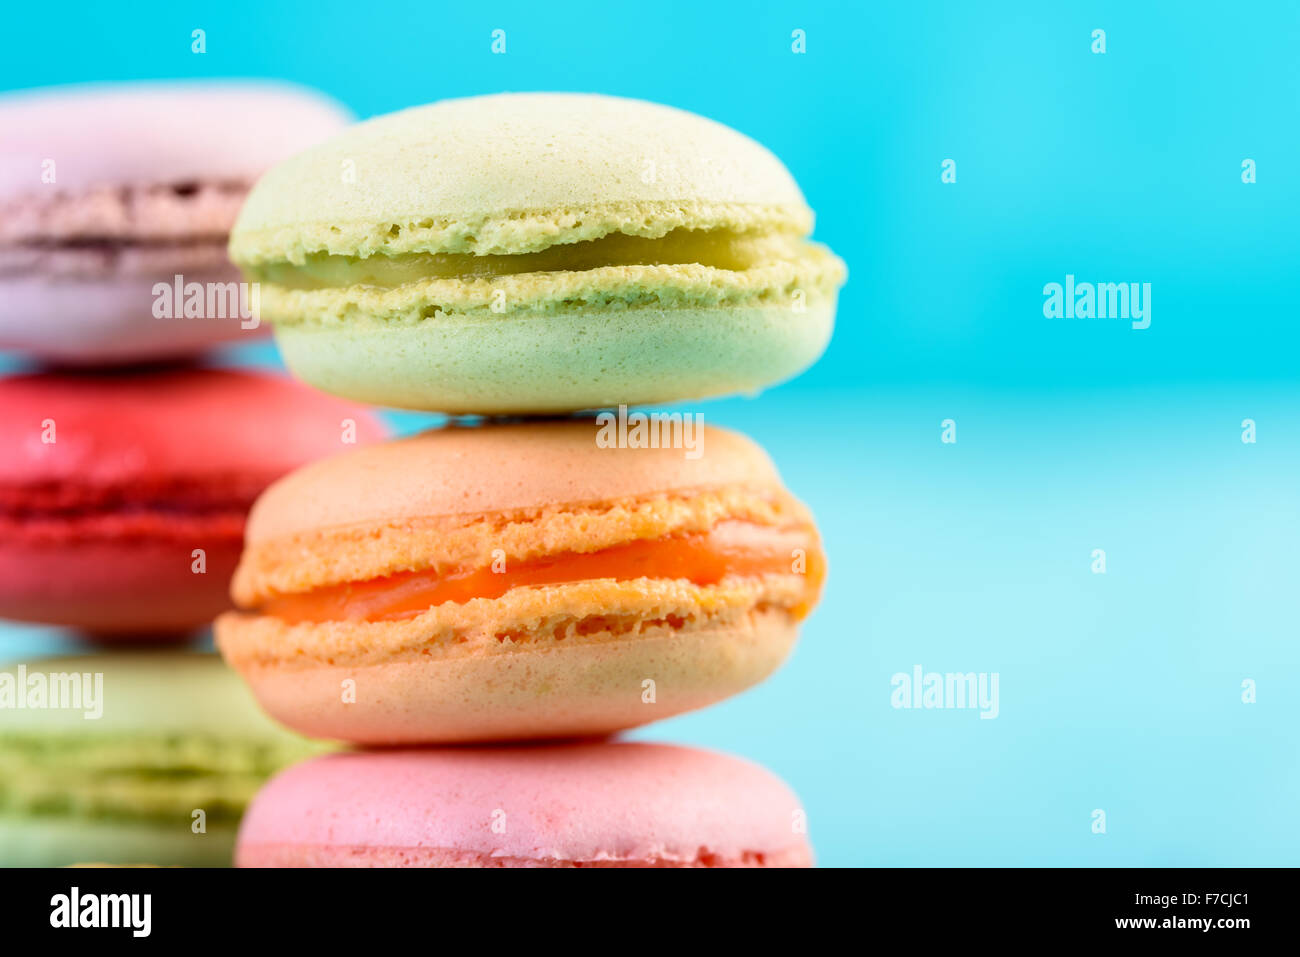 French Macaroons On Blue Background Stock Photo